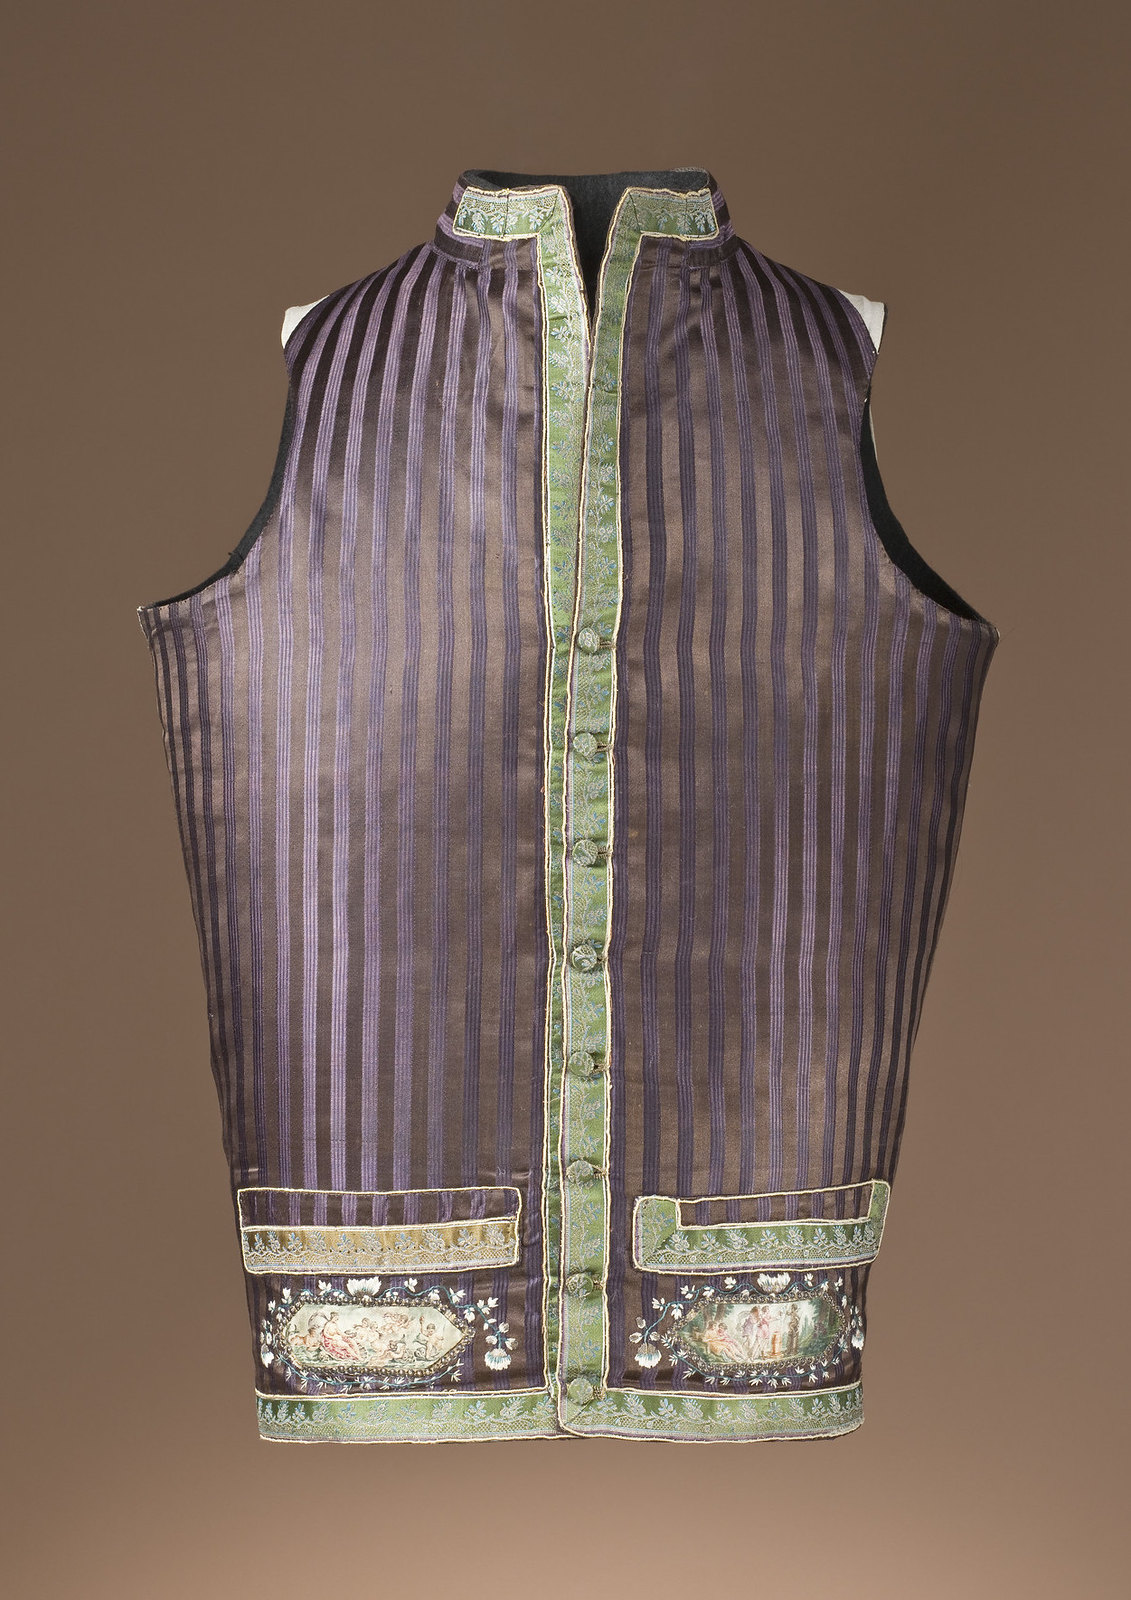 1790. Europe. Silk satin with silver-metallic and polychrome-silk thread and silver sequins. LACMA